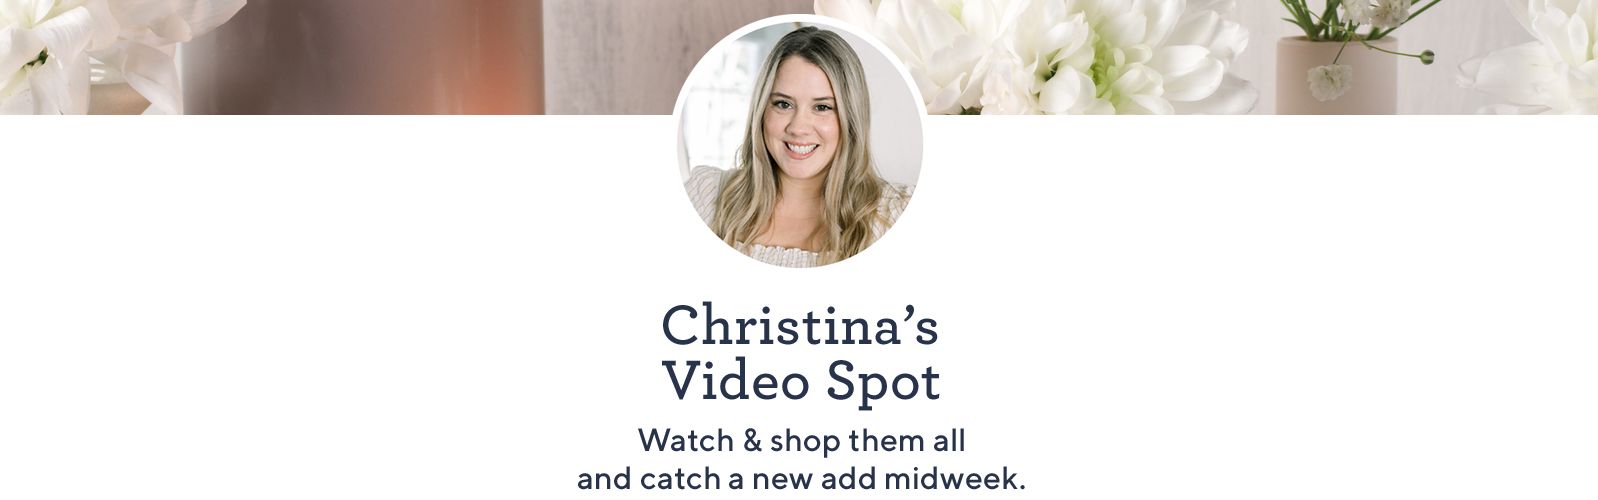 Christina's Video Spot. Watch & shop them all and catch a new add midweek.